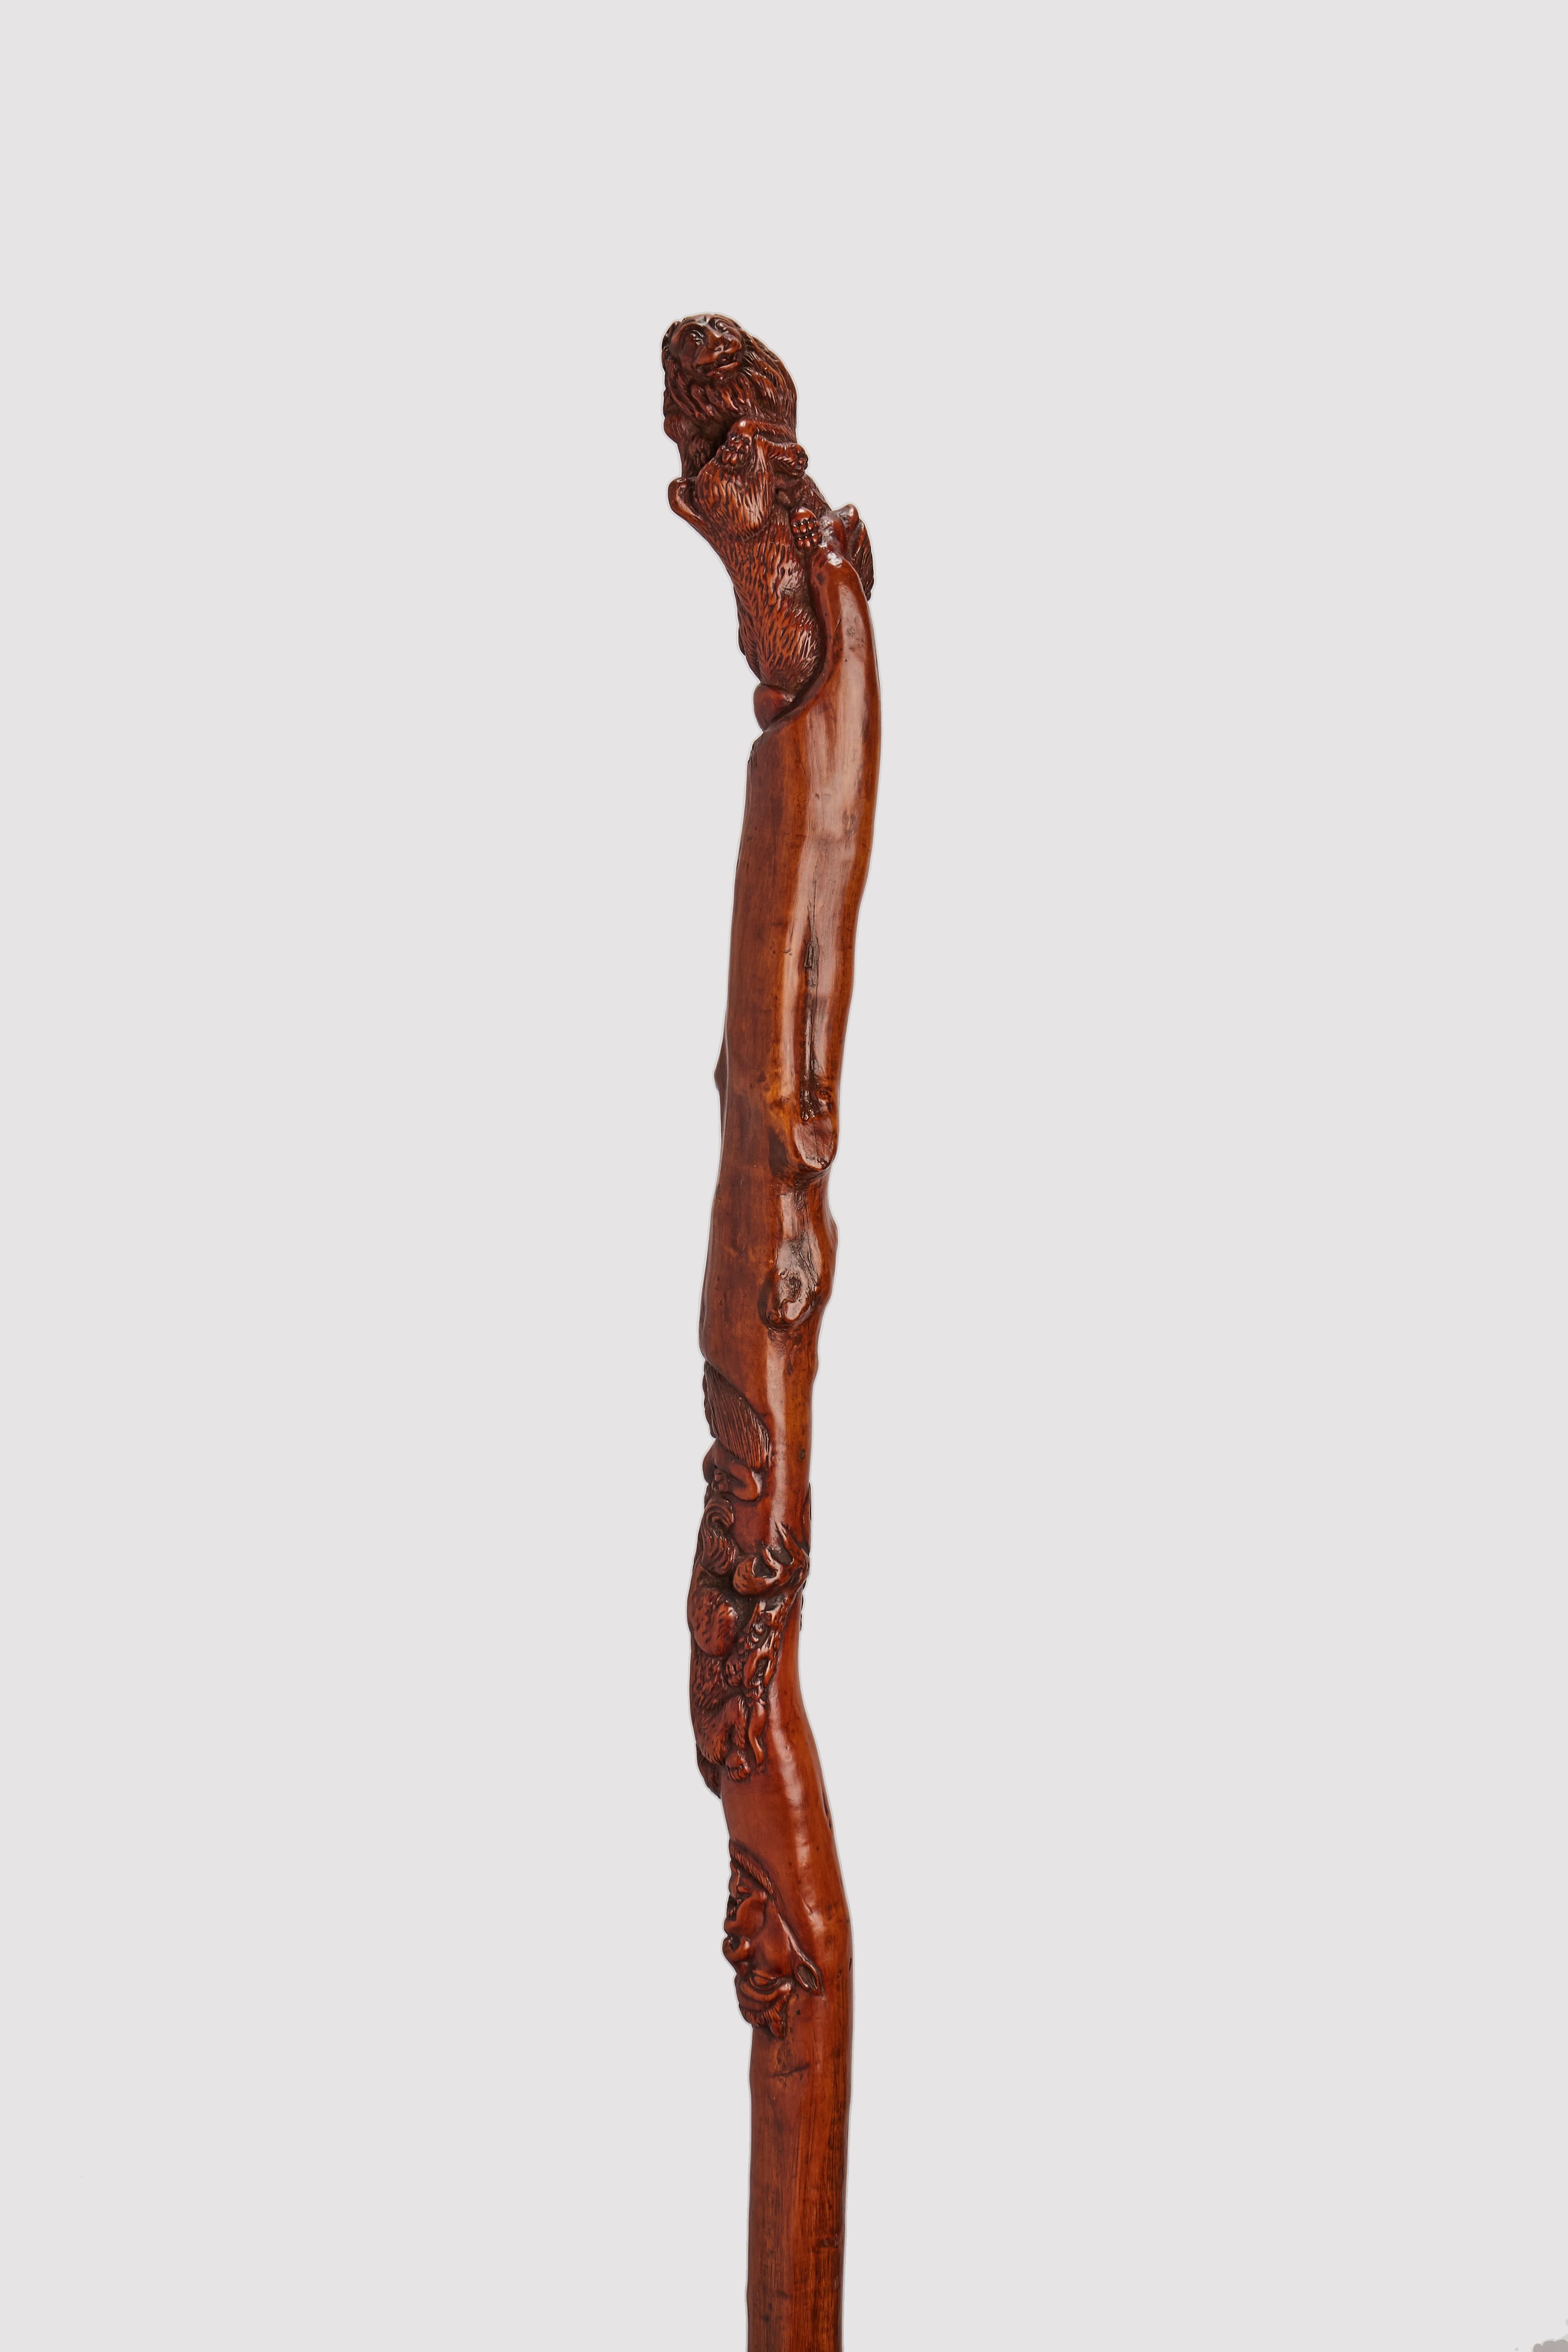 Folk art walking stick: single naturally growing boxwood branch with various angles, punctuated by a series of carvings with different subjects. The all-round handle depicts a fight between lions, underneath, in relief, a complex scene with a